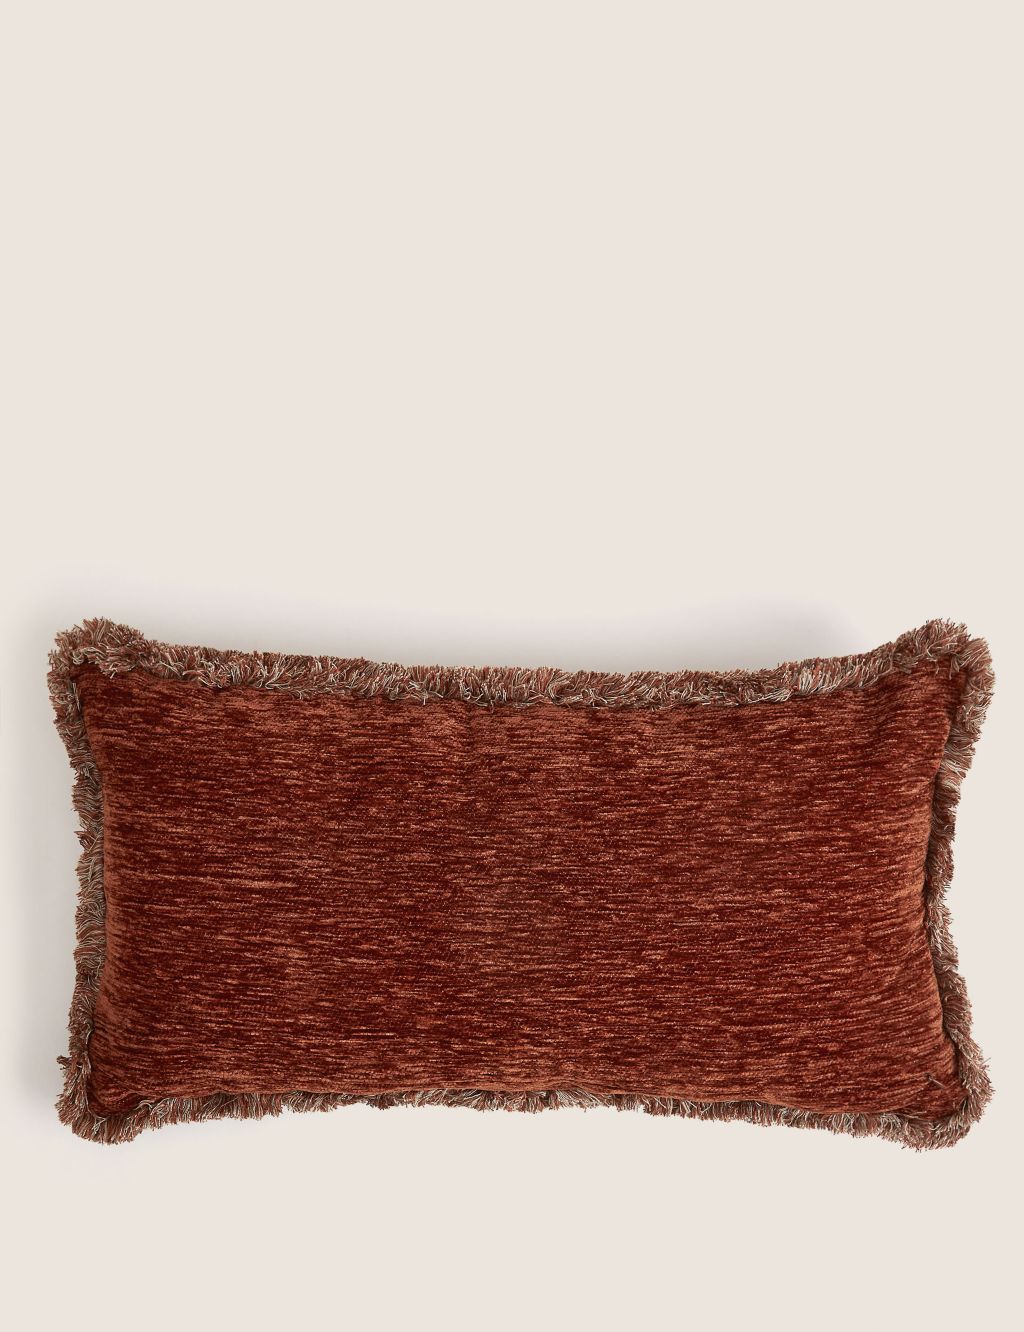 Chenille Patterned Bolster Cushion image 4